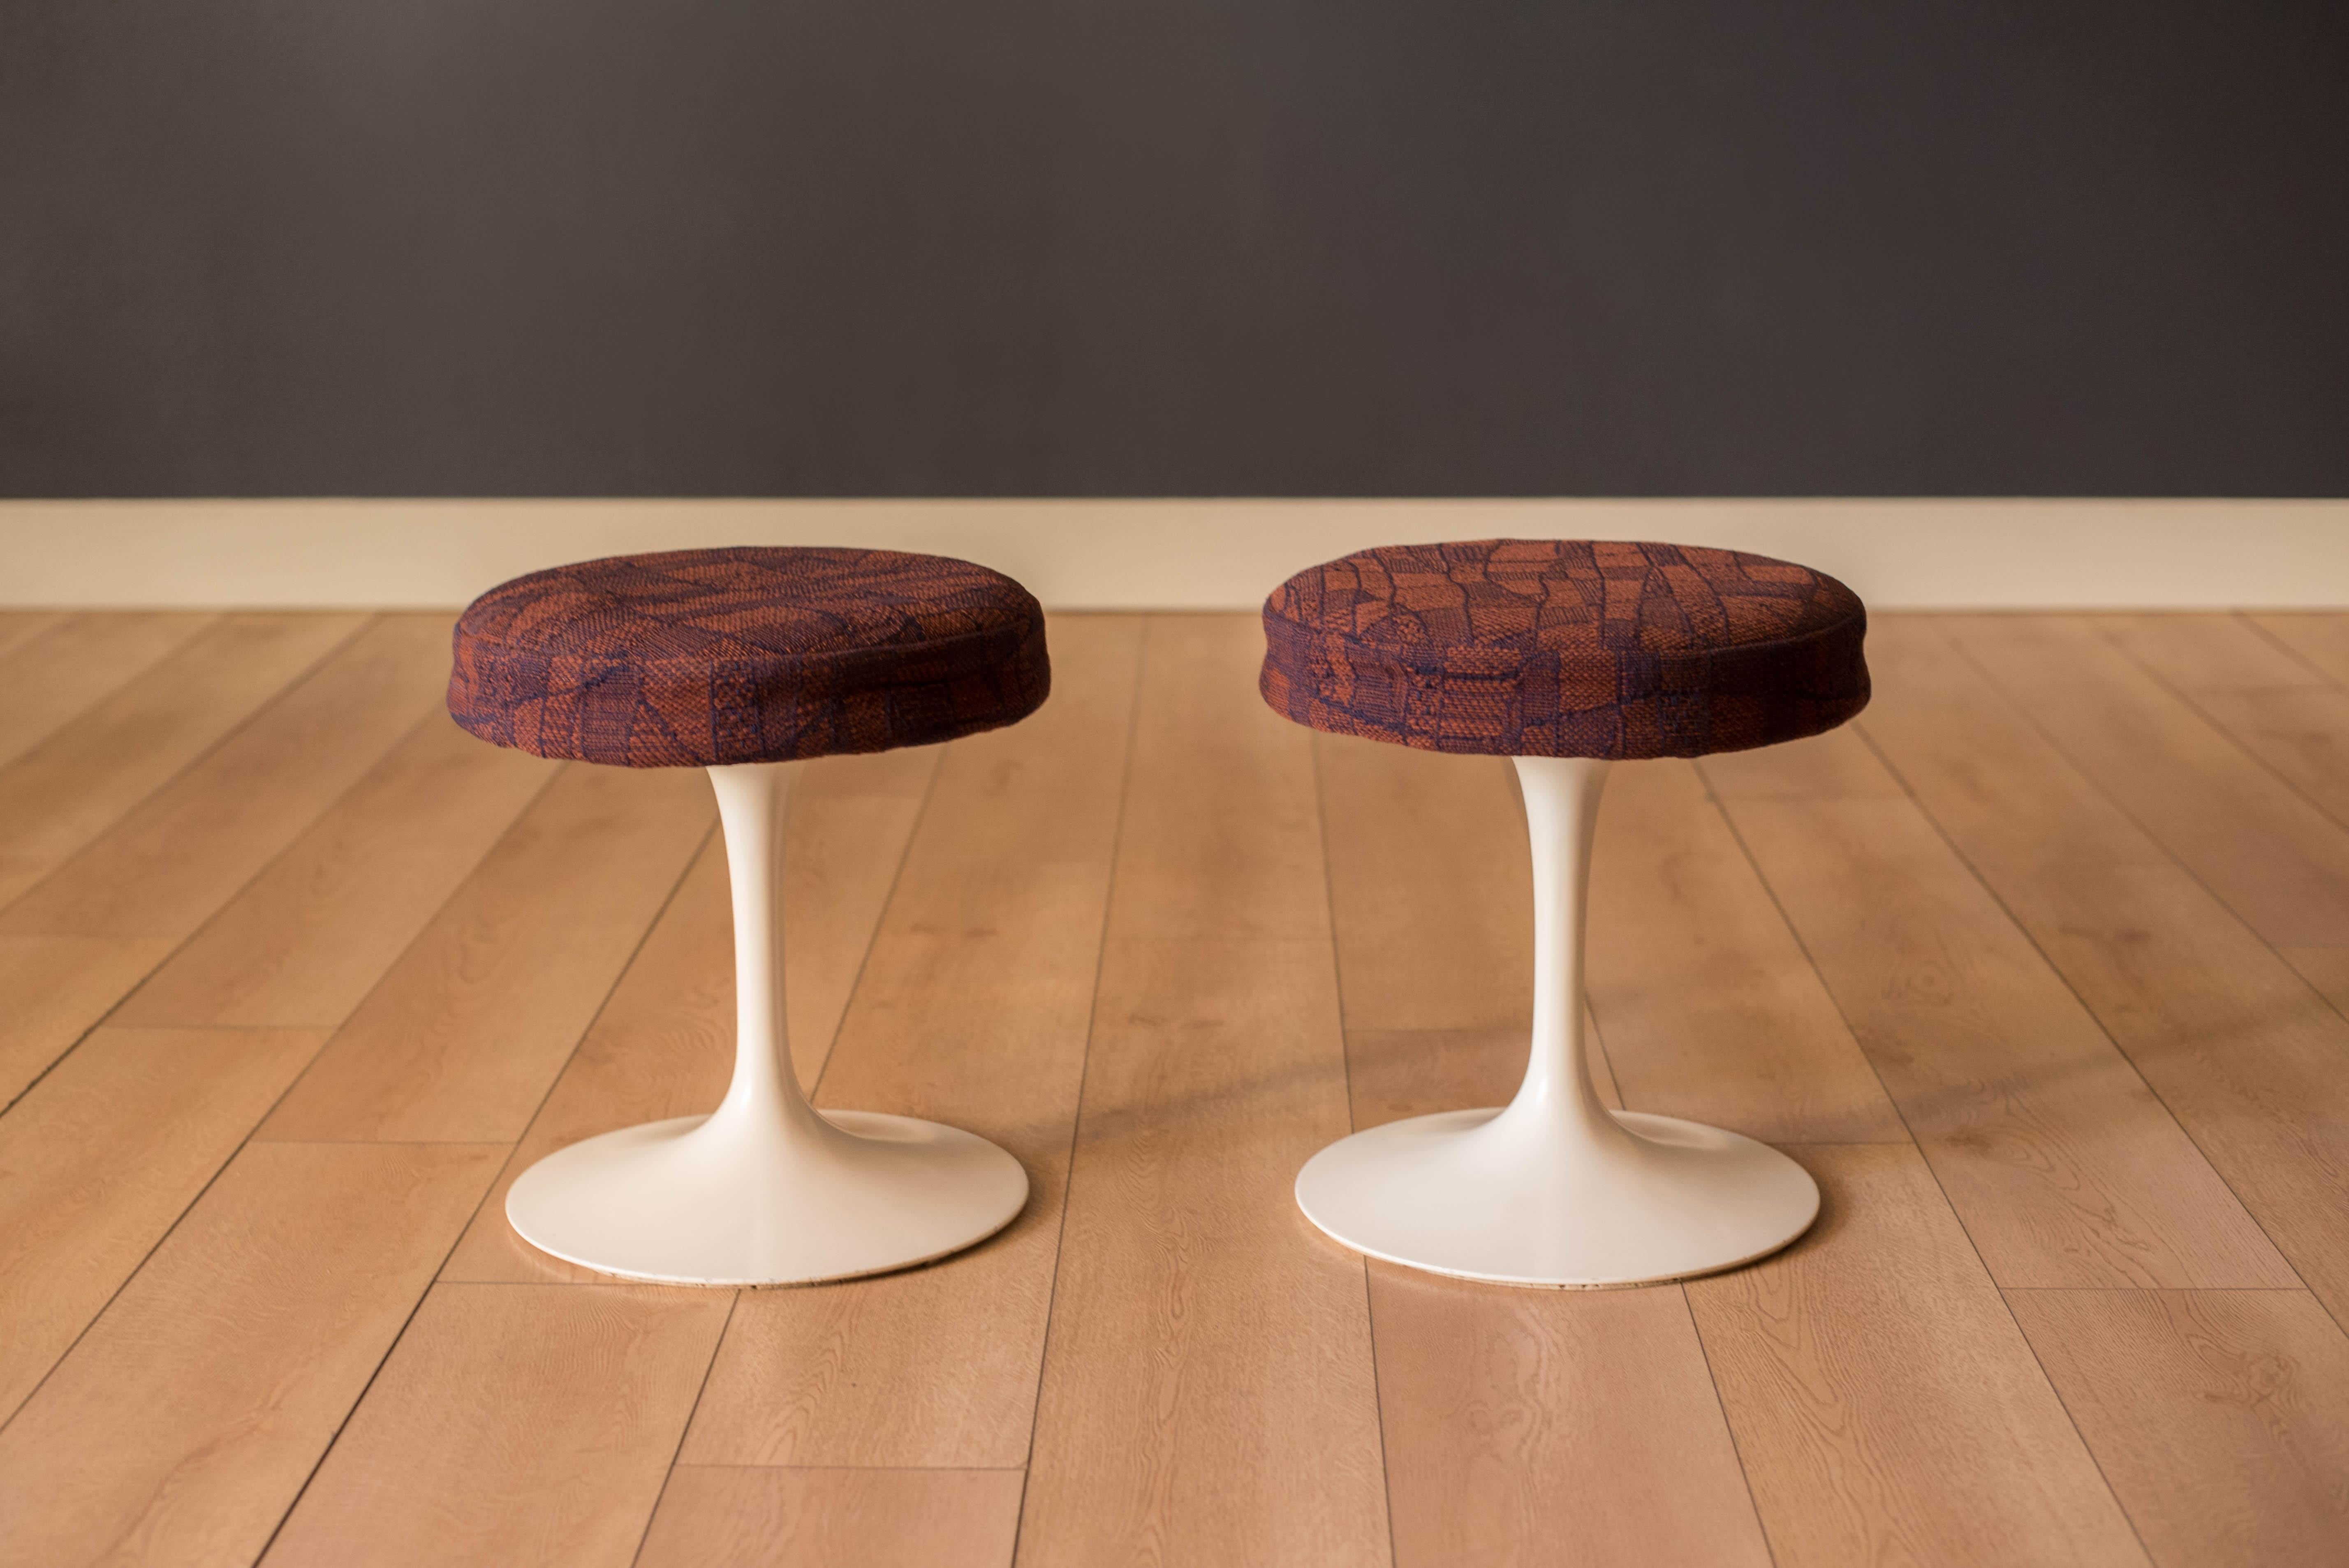 Mid-Century Modern pair of tulip stools designed by Eero Saarinen for Knoll circa 1980's. This versatile set features heavy cast aluminum tulip bases and round swivel seats in an abstract textured fabric. 

Features colors of burgundy red, purple,